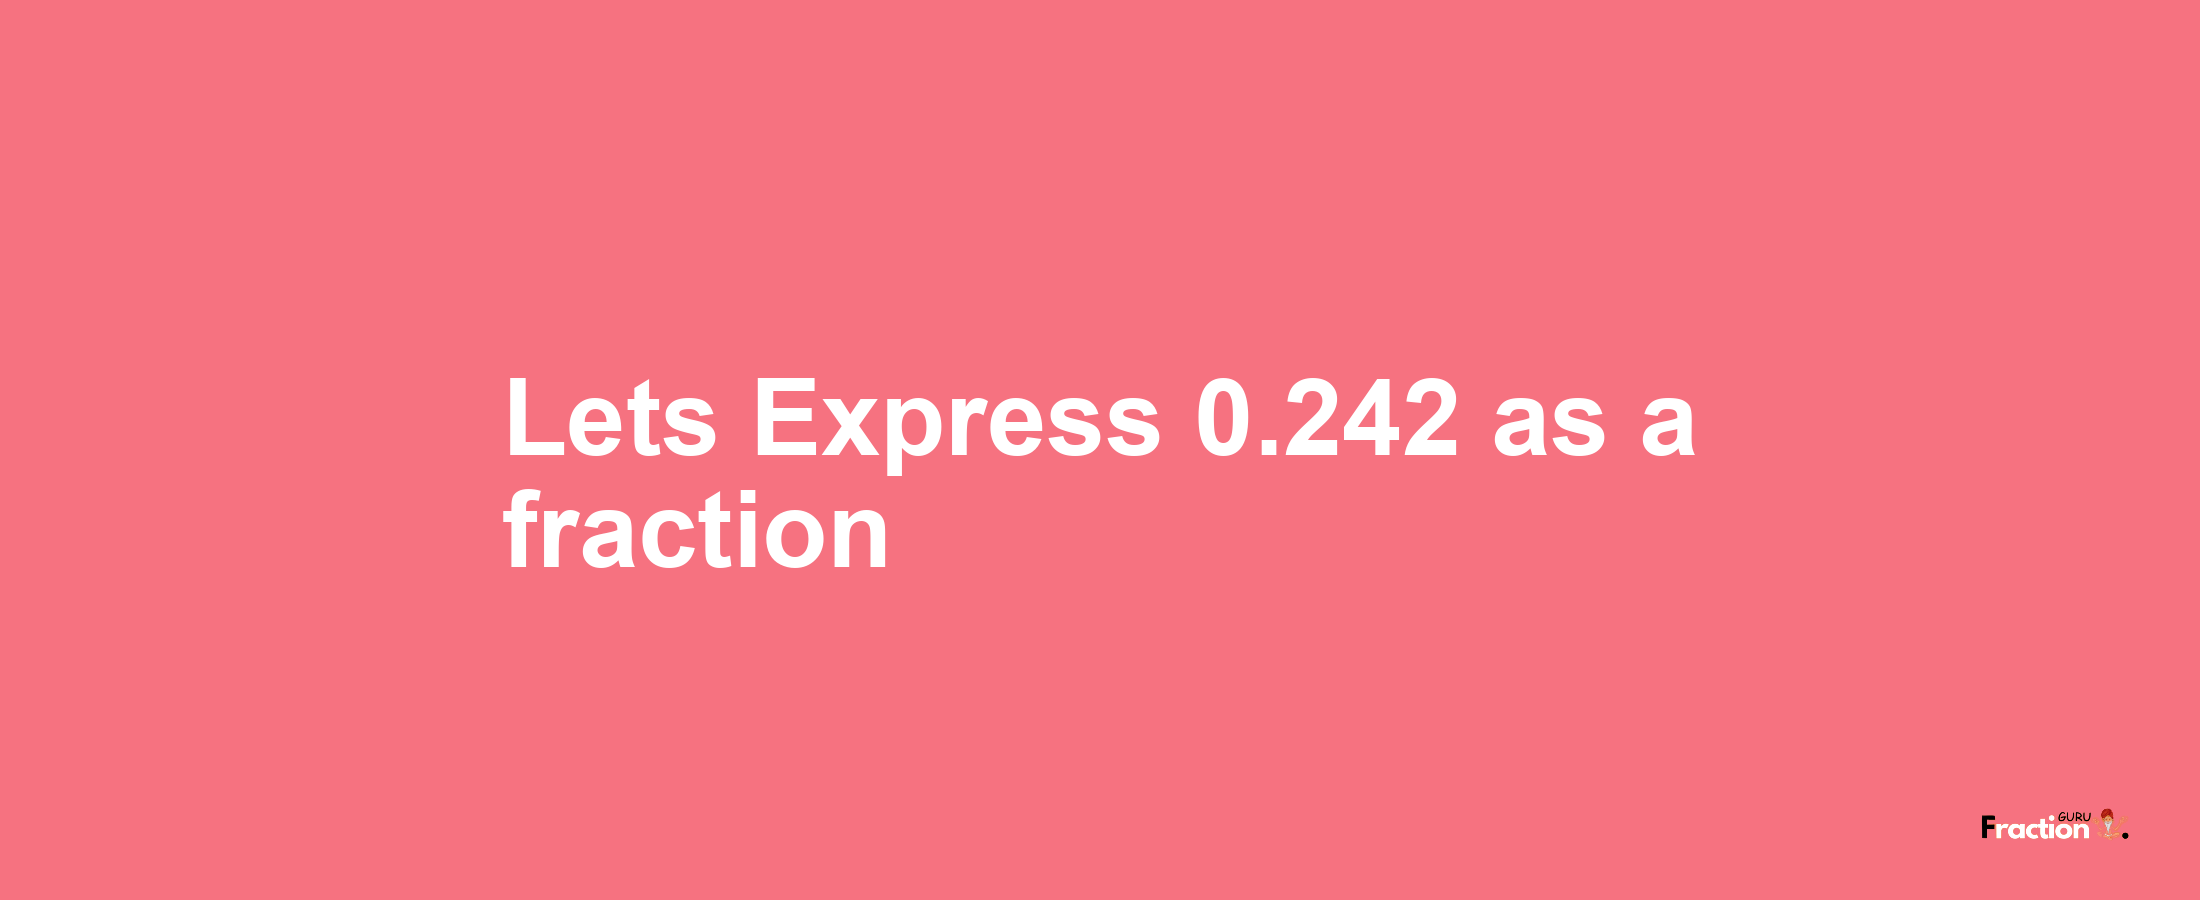 Lets Express 0.242 as afraction